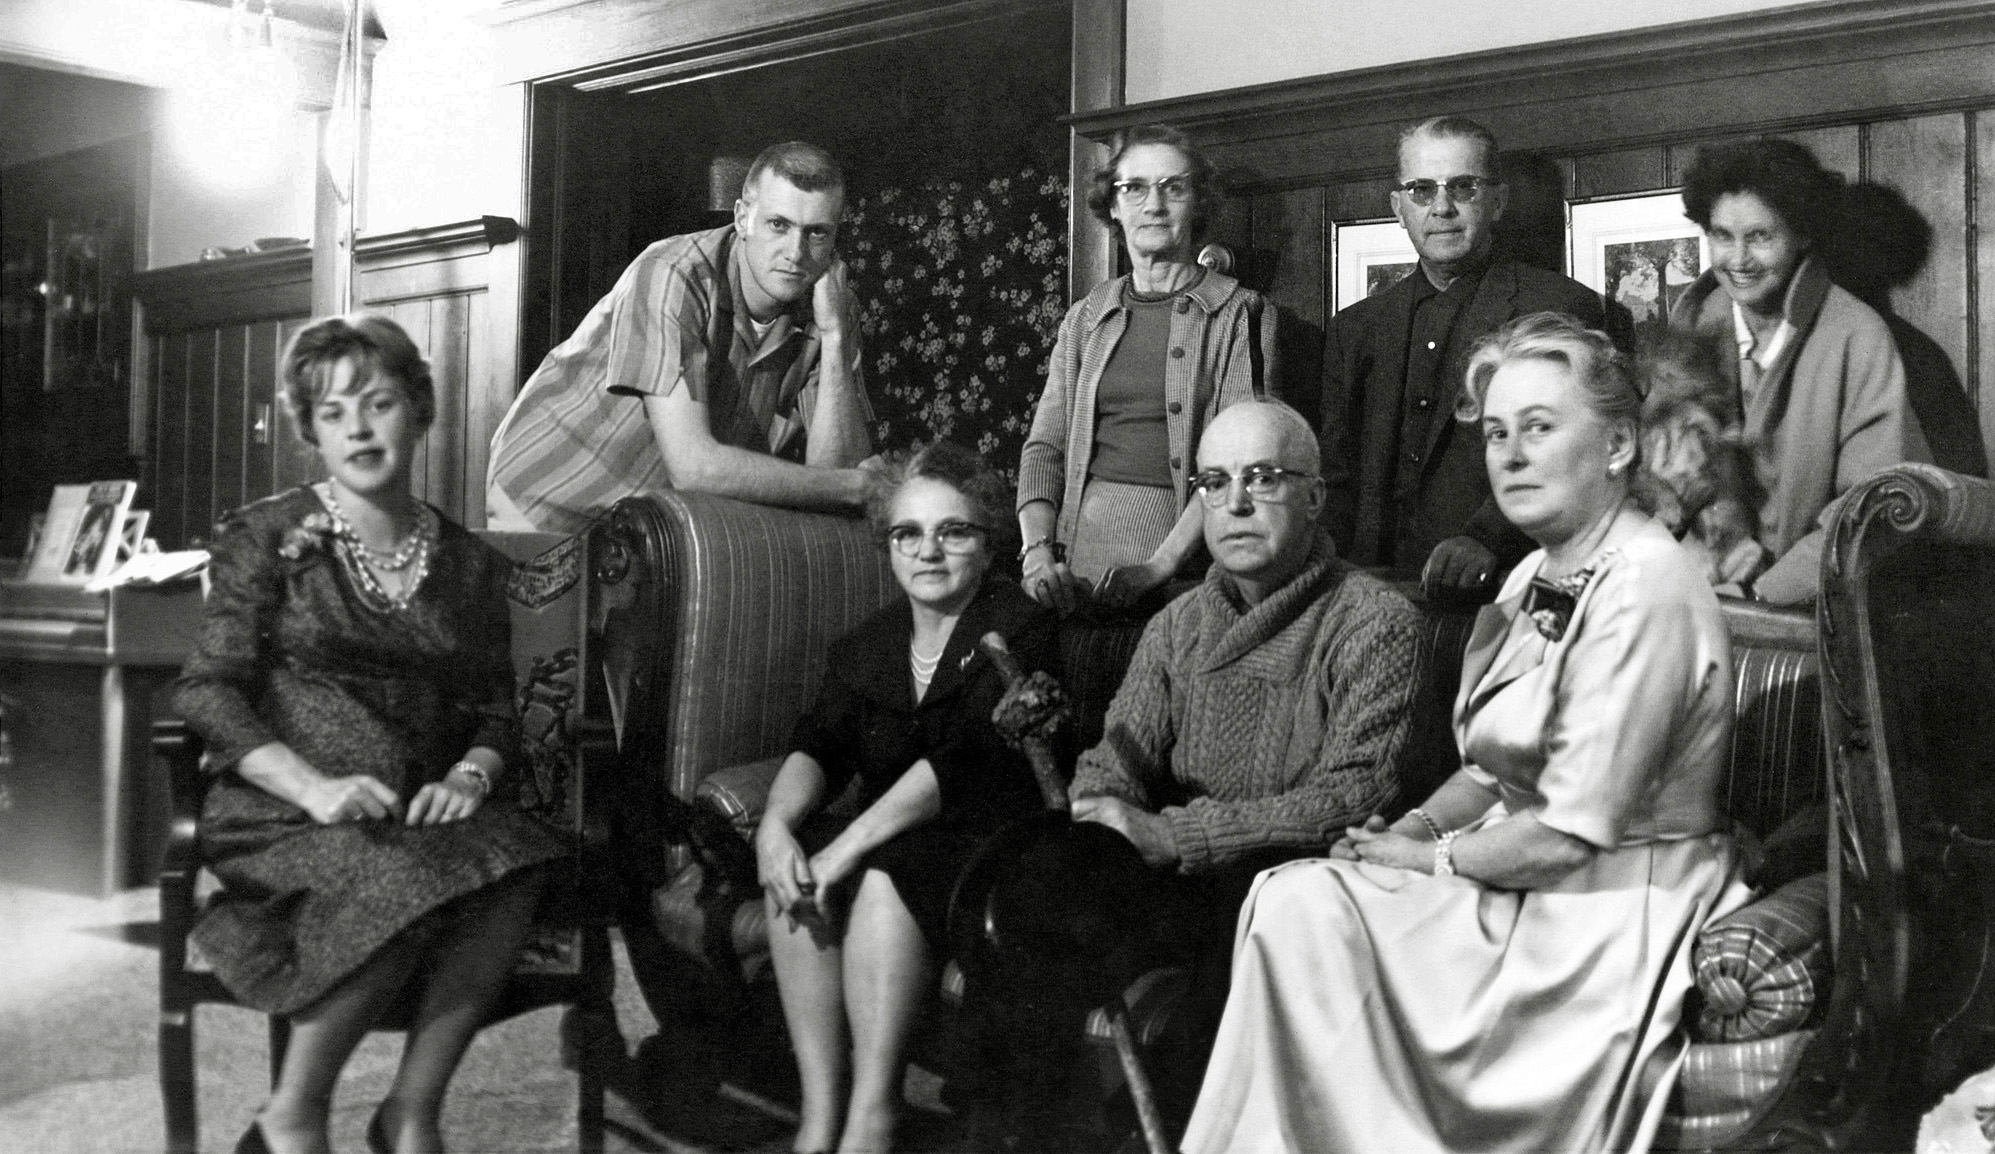 Here's my contribution to that popular Shorpy genre, the unsmiling-group photo. In this case, it's because I told them all to stay verrrry still for the brief time exposure. I was using the only camera I had access to at the time that could do that, an old c.1935 Kodak Junior Six-16. The negative is long gone, so I scanned this from a period print.

My mother is standing in the back at center, and we're in the Larkspur, California home of our friends, the man on the couch with the shillelagh and his wife seated at right. At the left is their daughter and her husband. She was recently seen in this same wainscoted room here. The only one who moved during the exposure, probably because she's trying to restrain her squirming pomeranian, is our neighbor at upper right, the mother of one of my childhood chums. I may have known who the other couple was at one time, but no more. View full size.